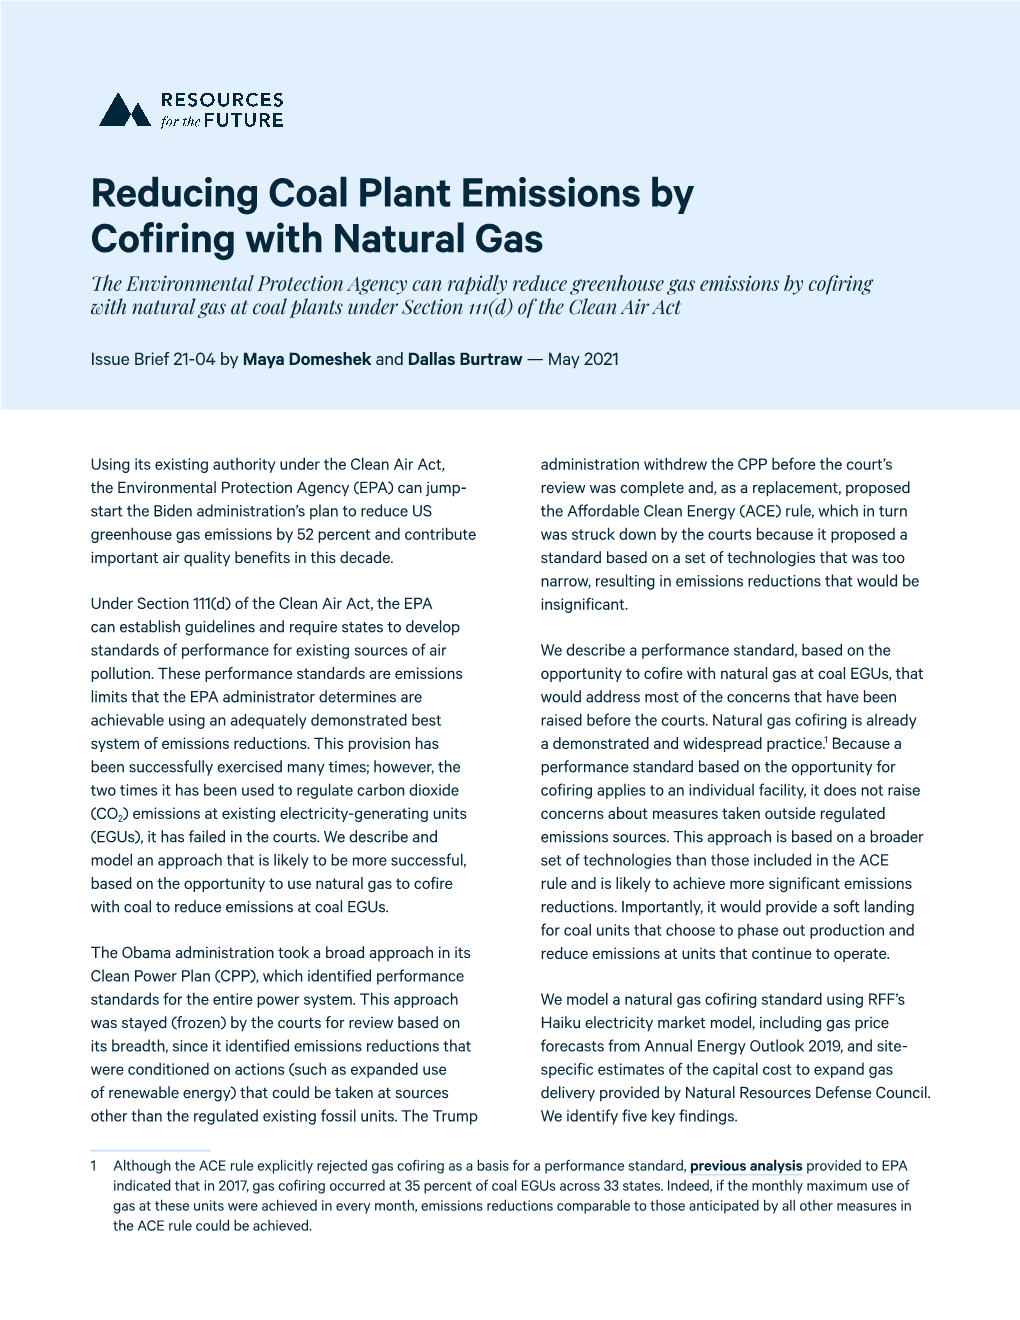 Reducing Coal Plant Emissions by Cofiring with Natural